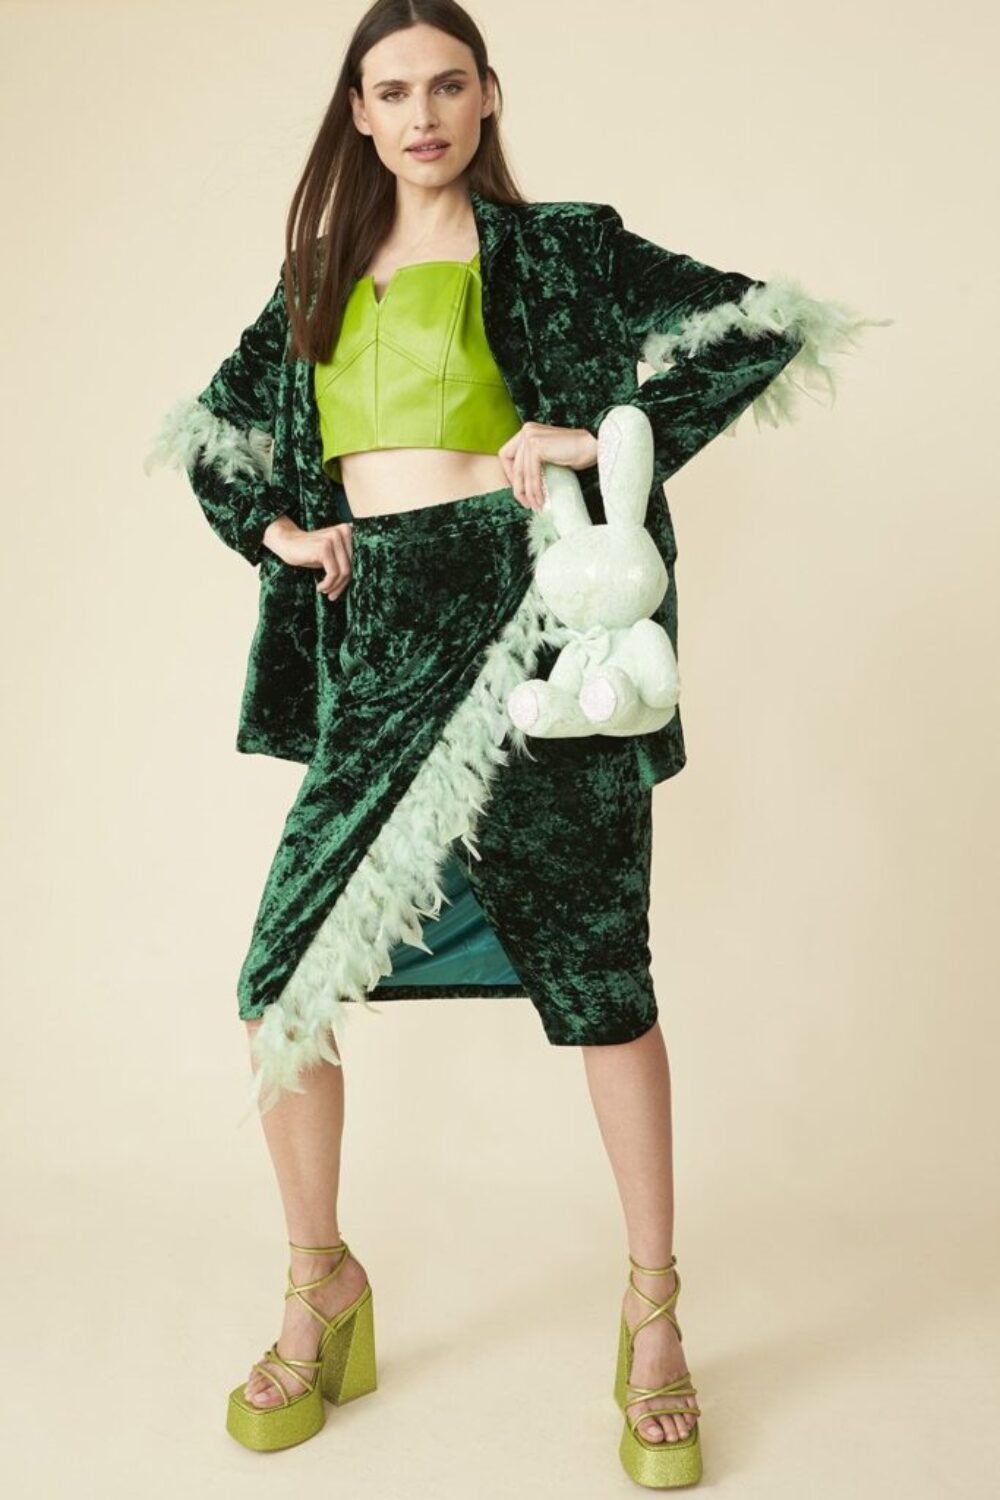 Shop Lux Emerald Green Velvet Blazer with Feather and women's luxury and designer clothes at www.lux-apparel.co.uk